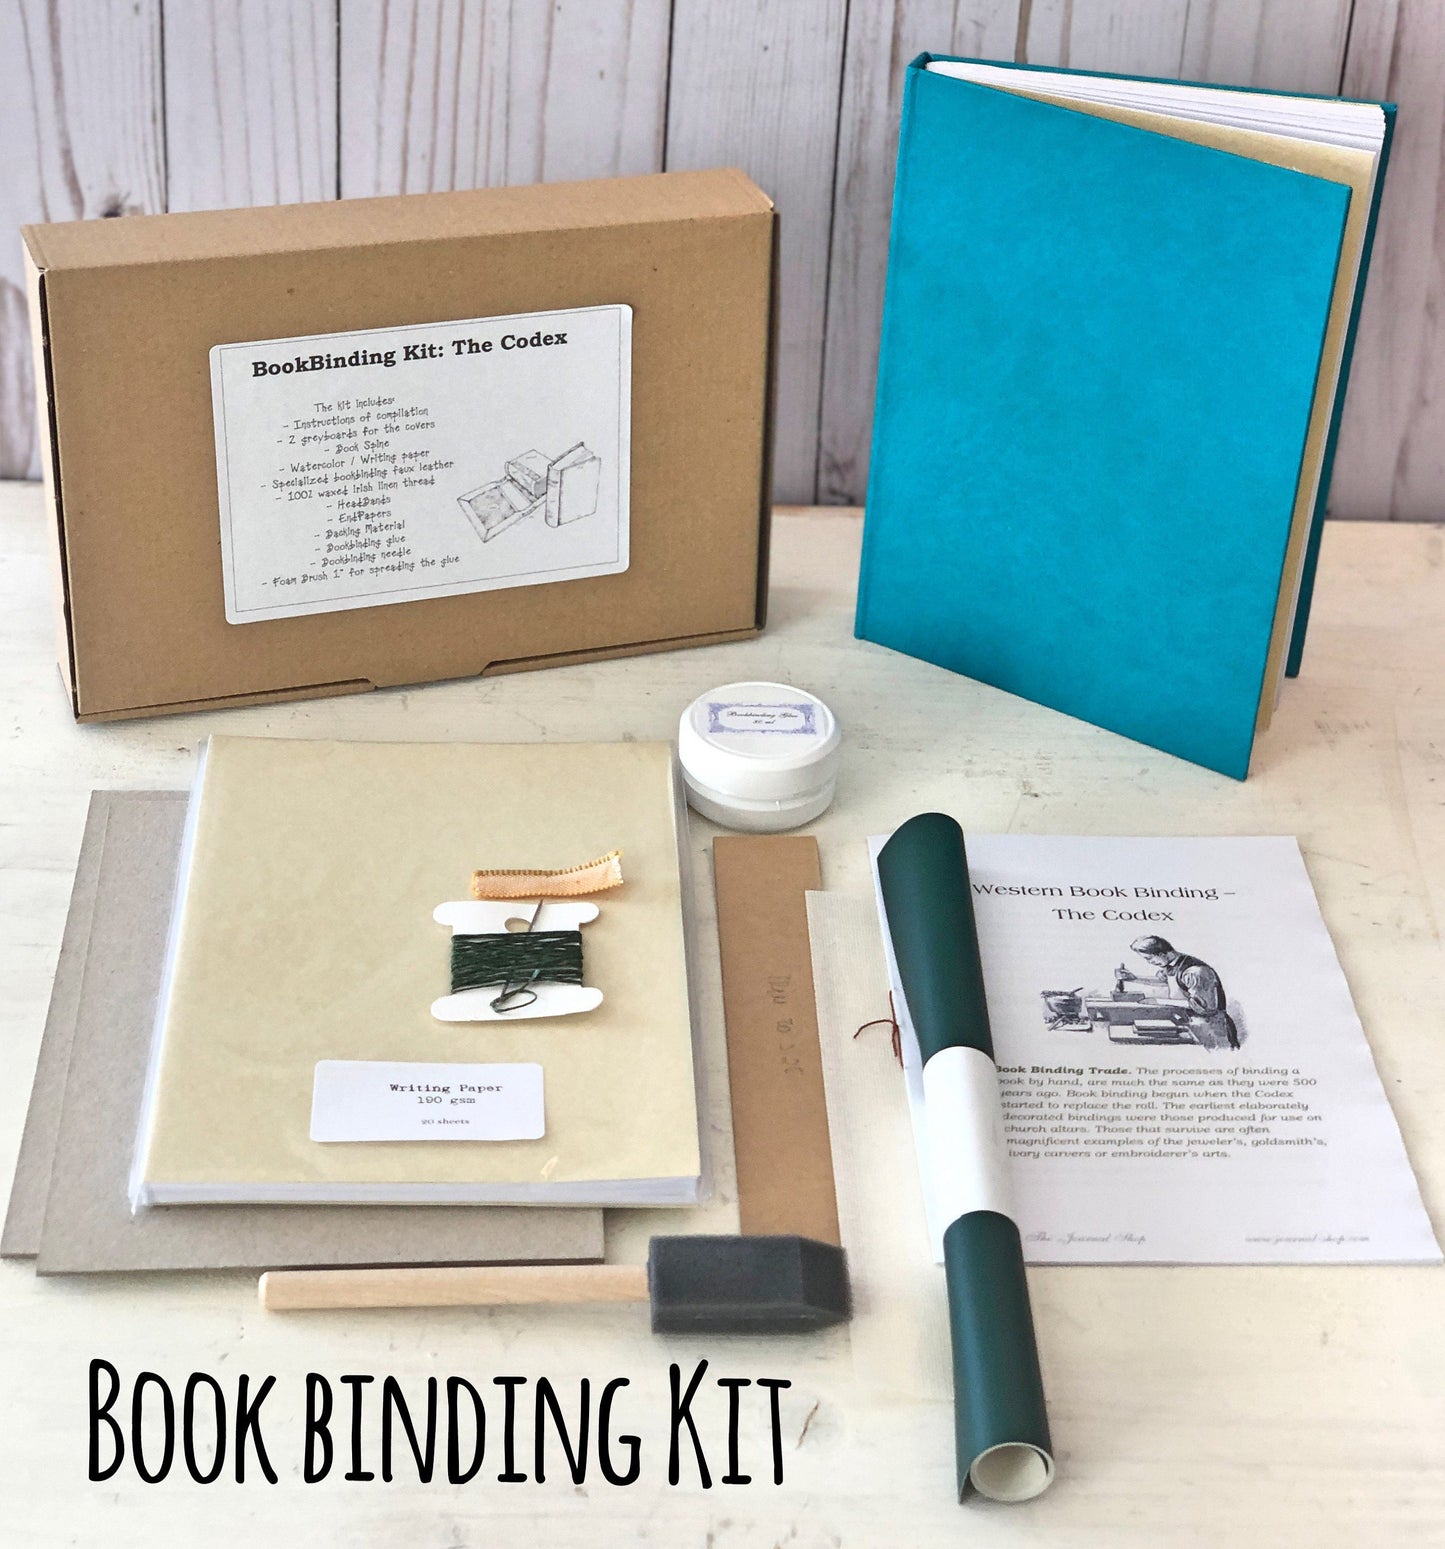 First kit purchased : r/bookbinding